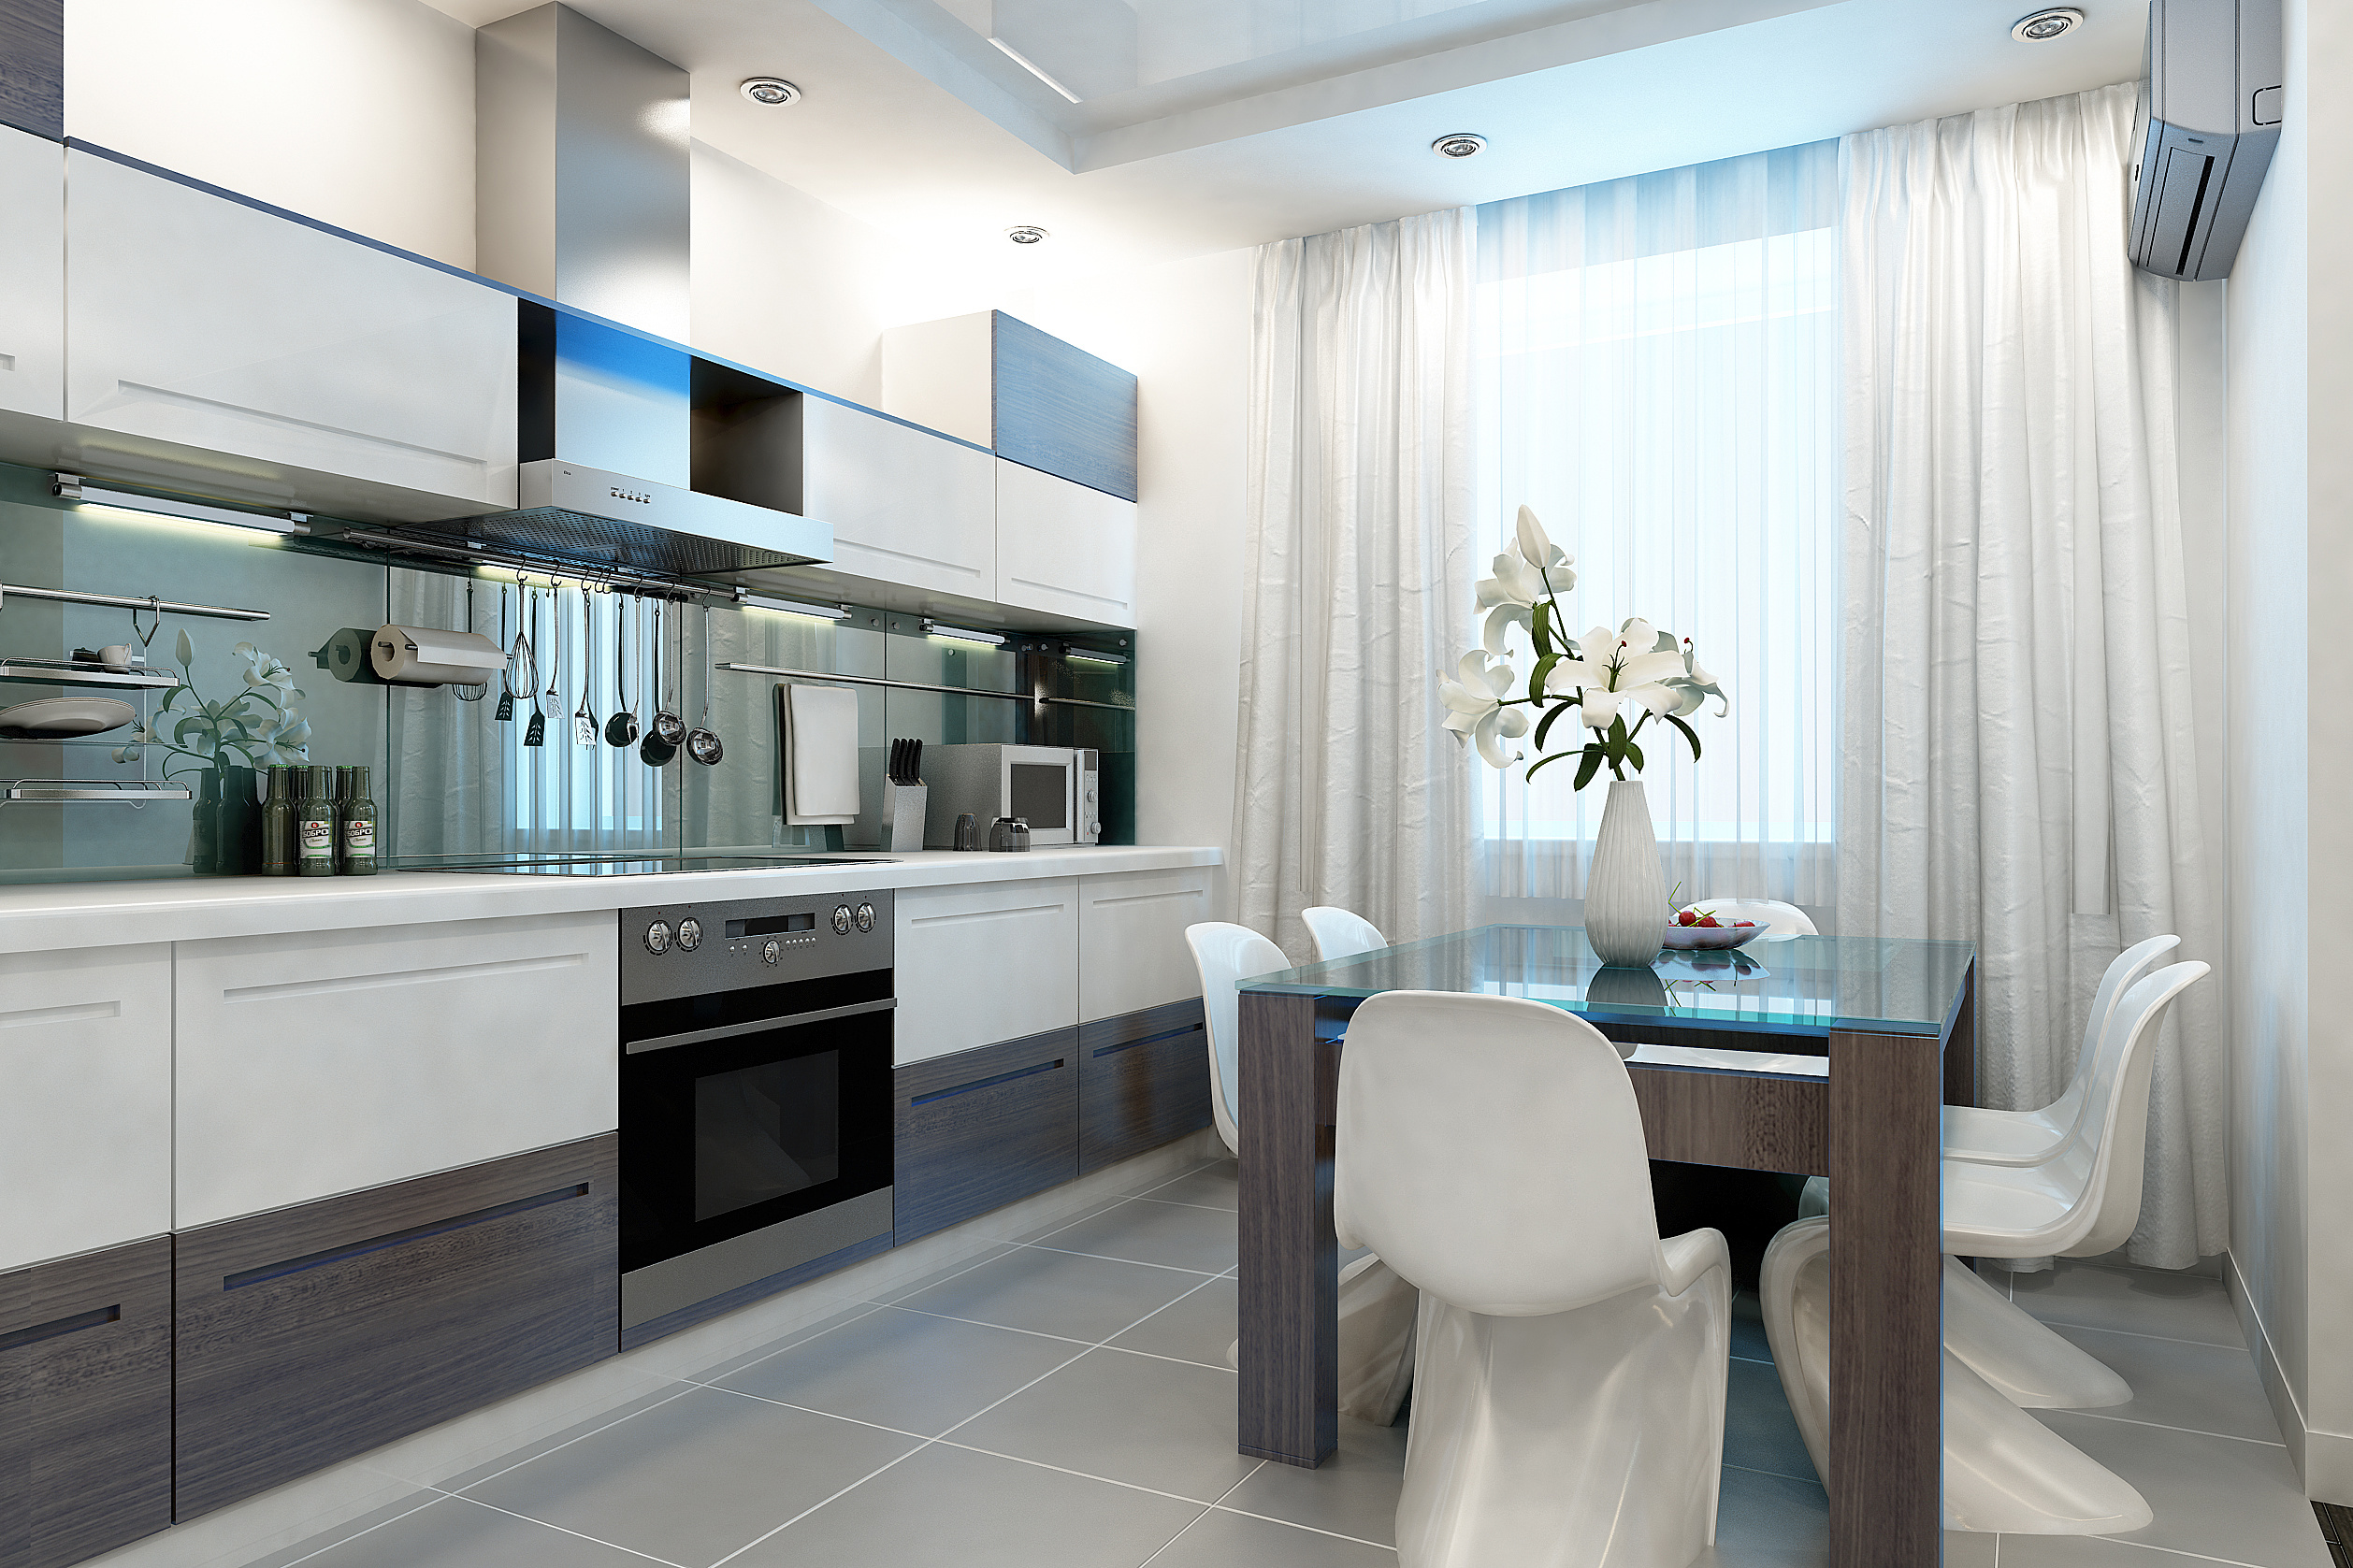 Choose Modern Kitchen Curtains And Show Your Style